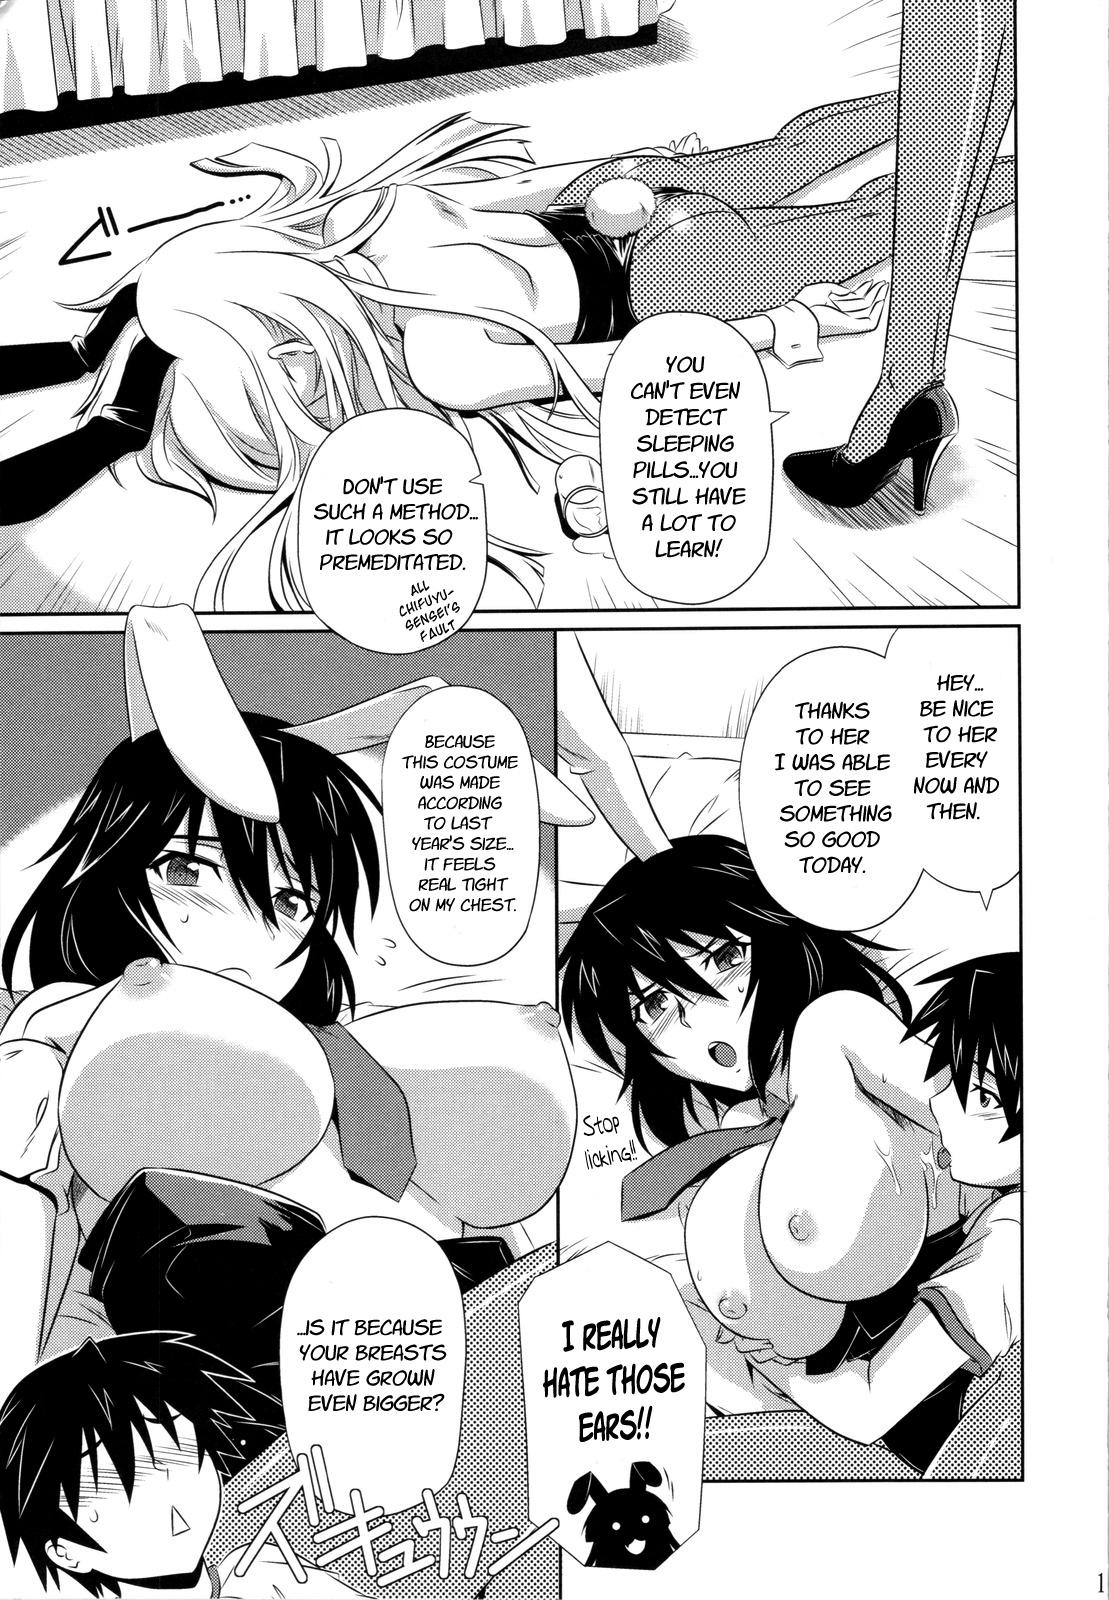 Cumming is Incest Strategy 3 - Infinite stratos 18 Year Old - Page 10